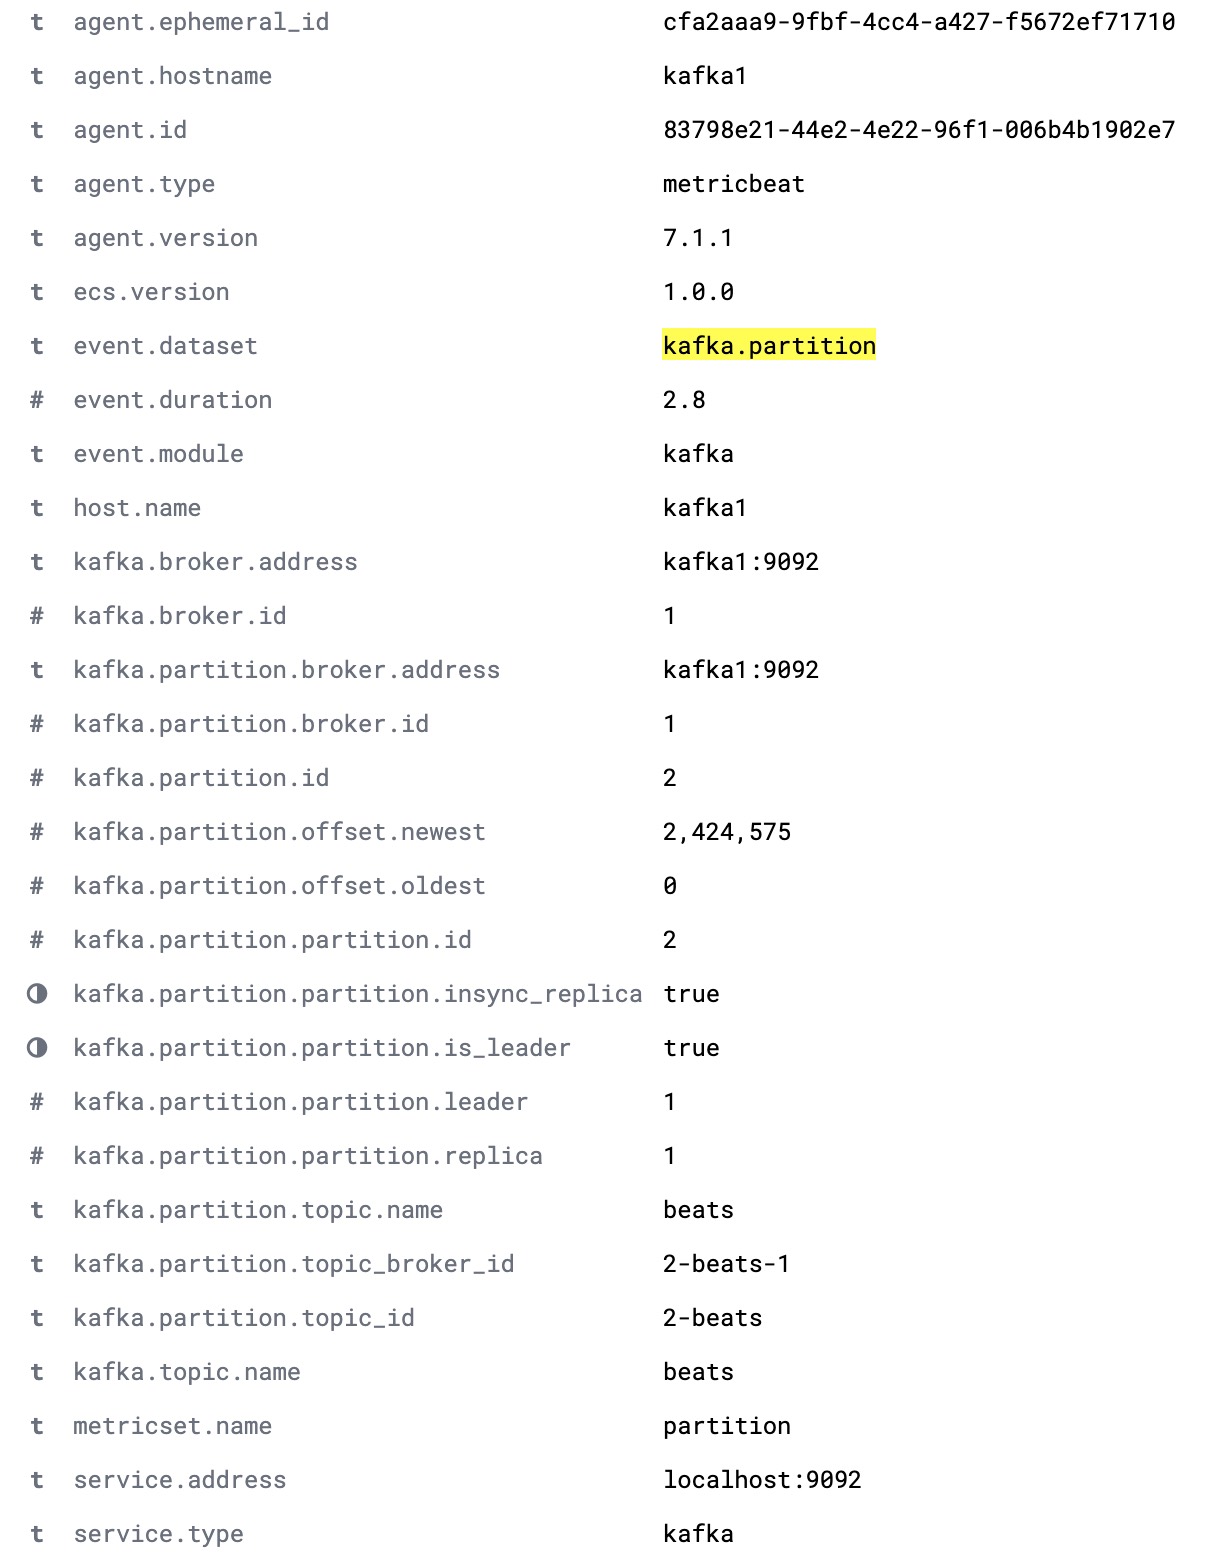 Complete kafka.partition document giving full detail of partitions in a cluster